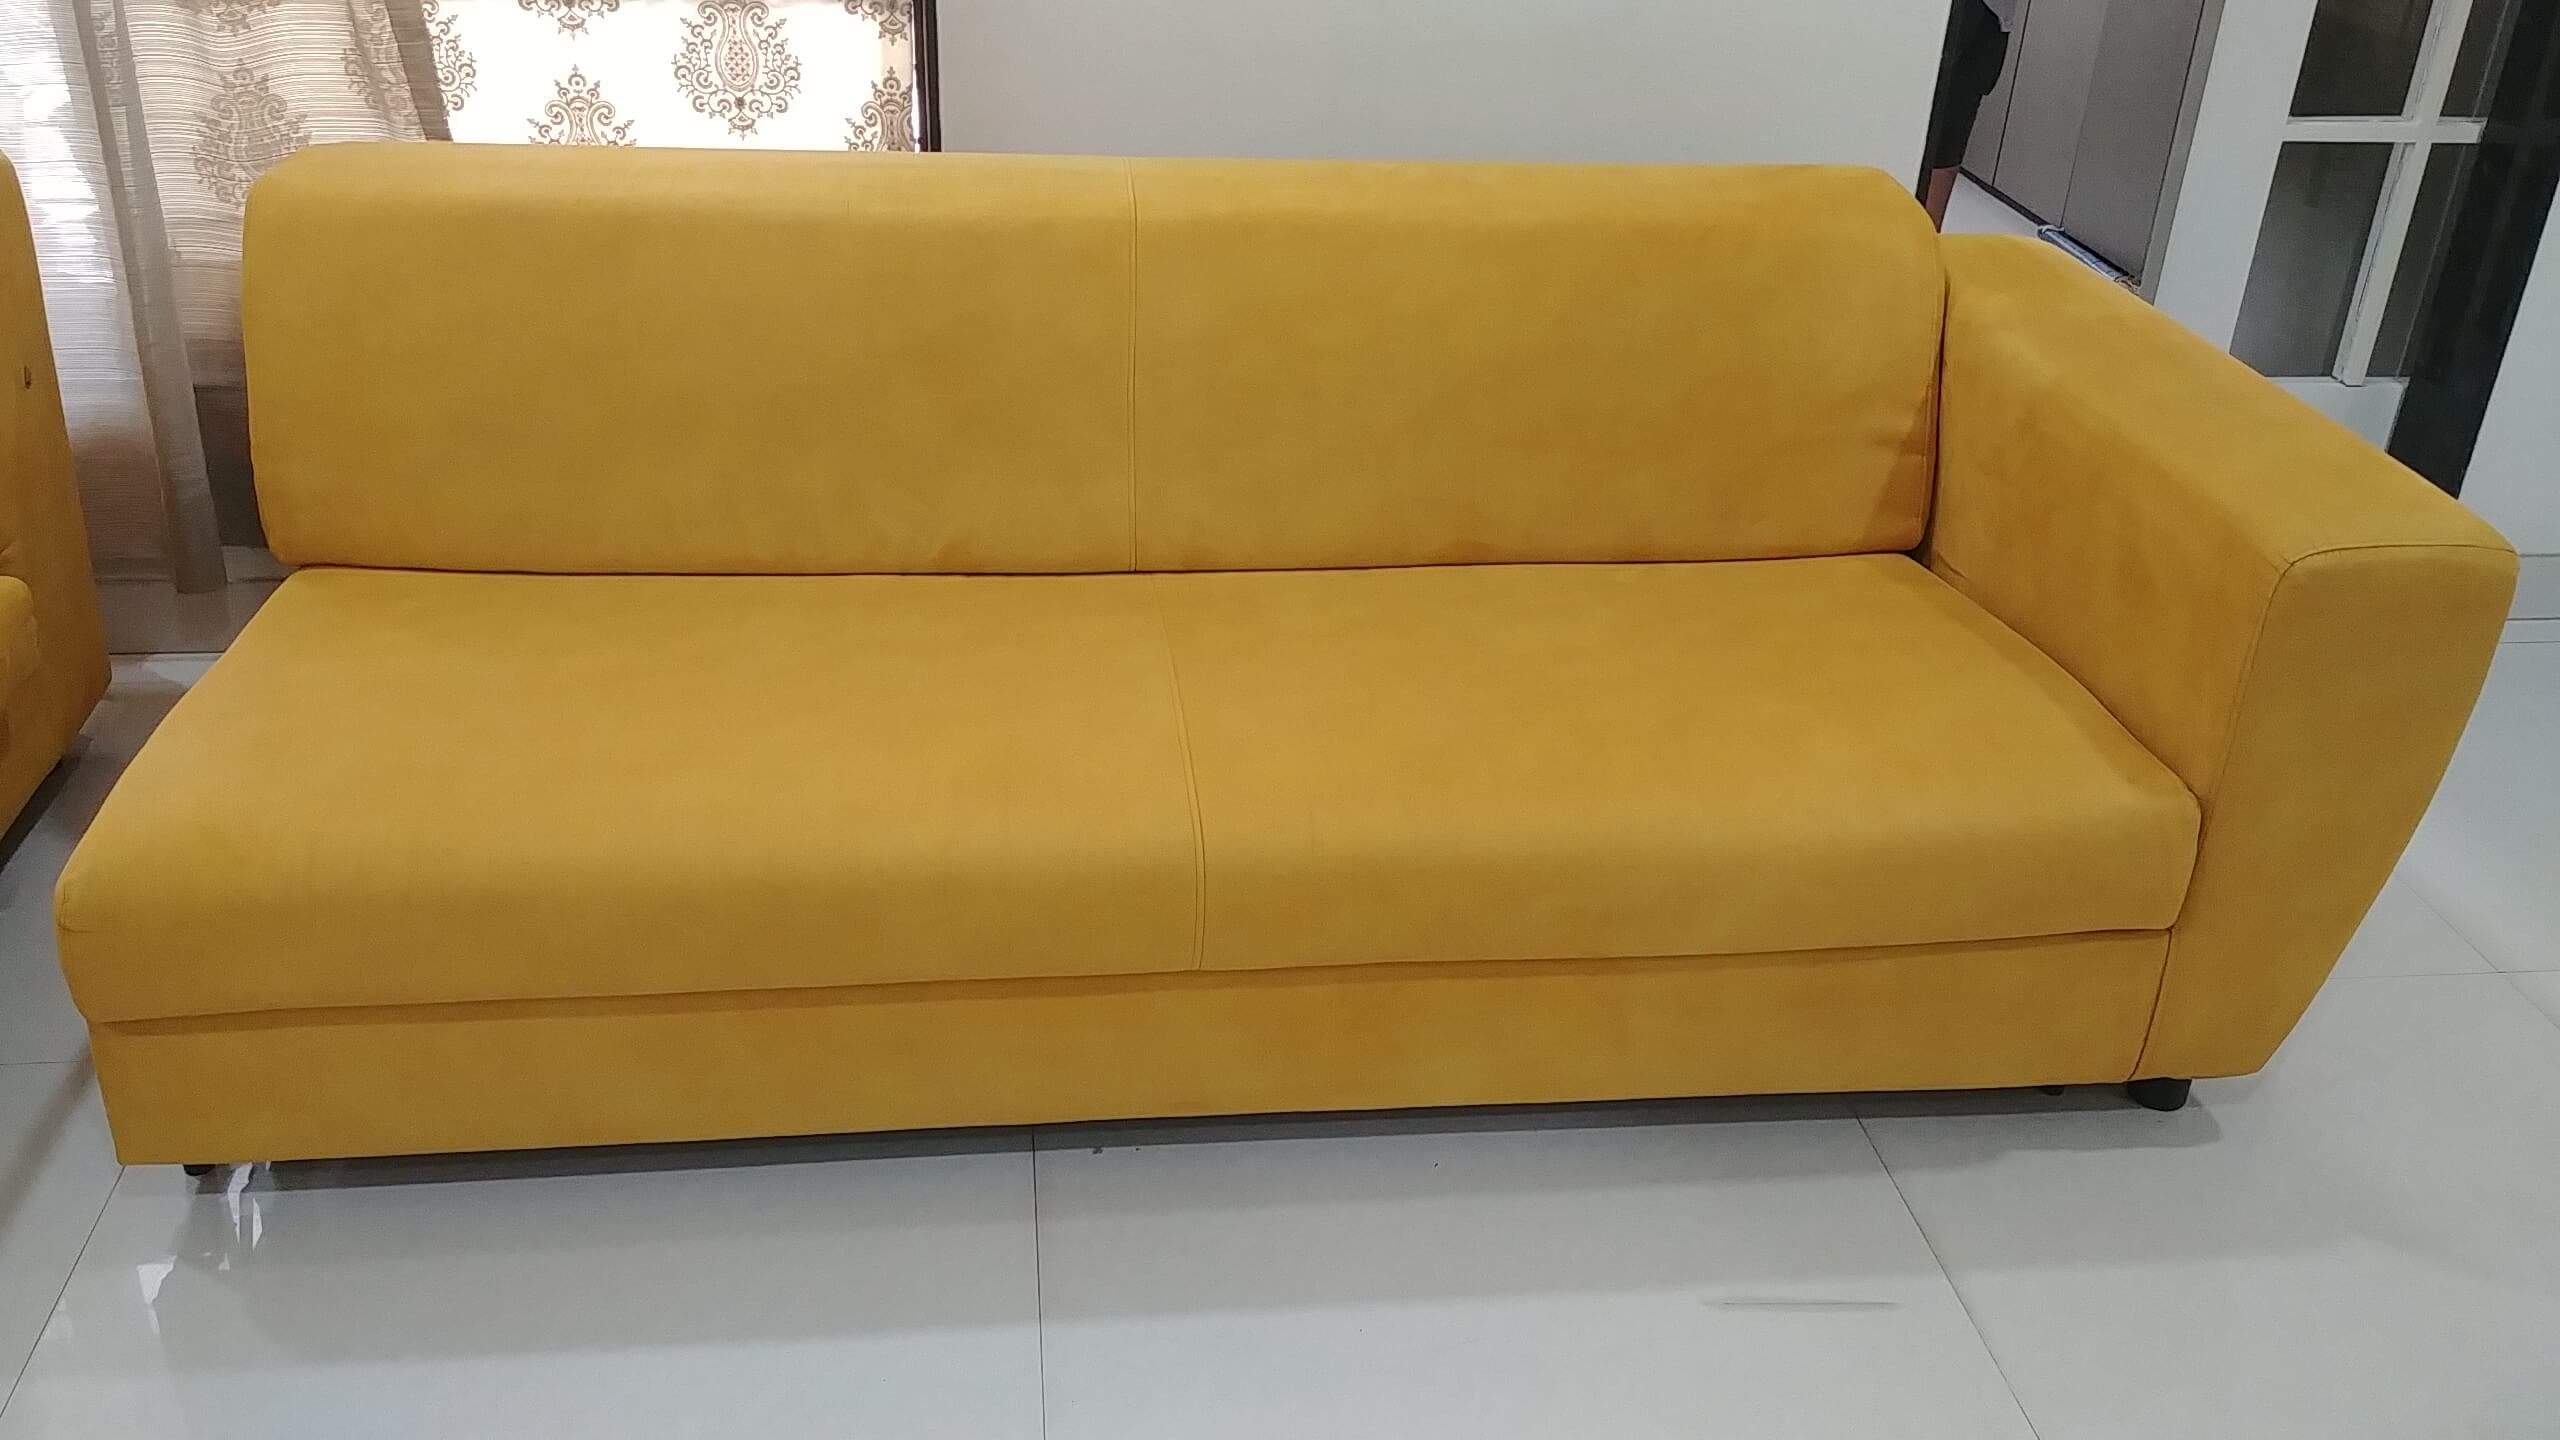 02 Fabric sofa After cleaning.